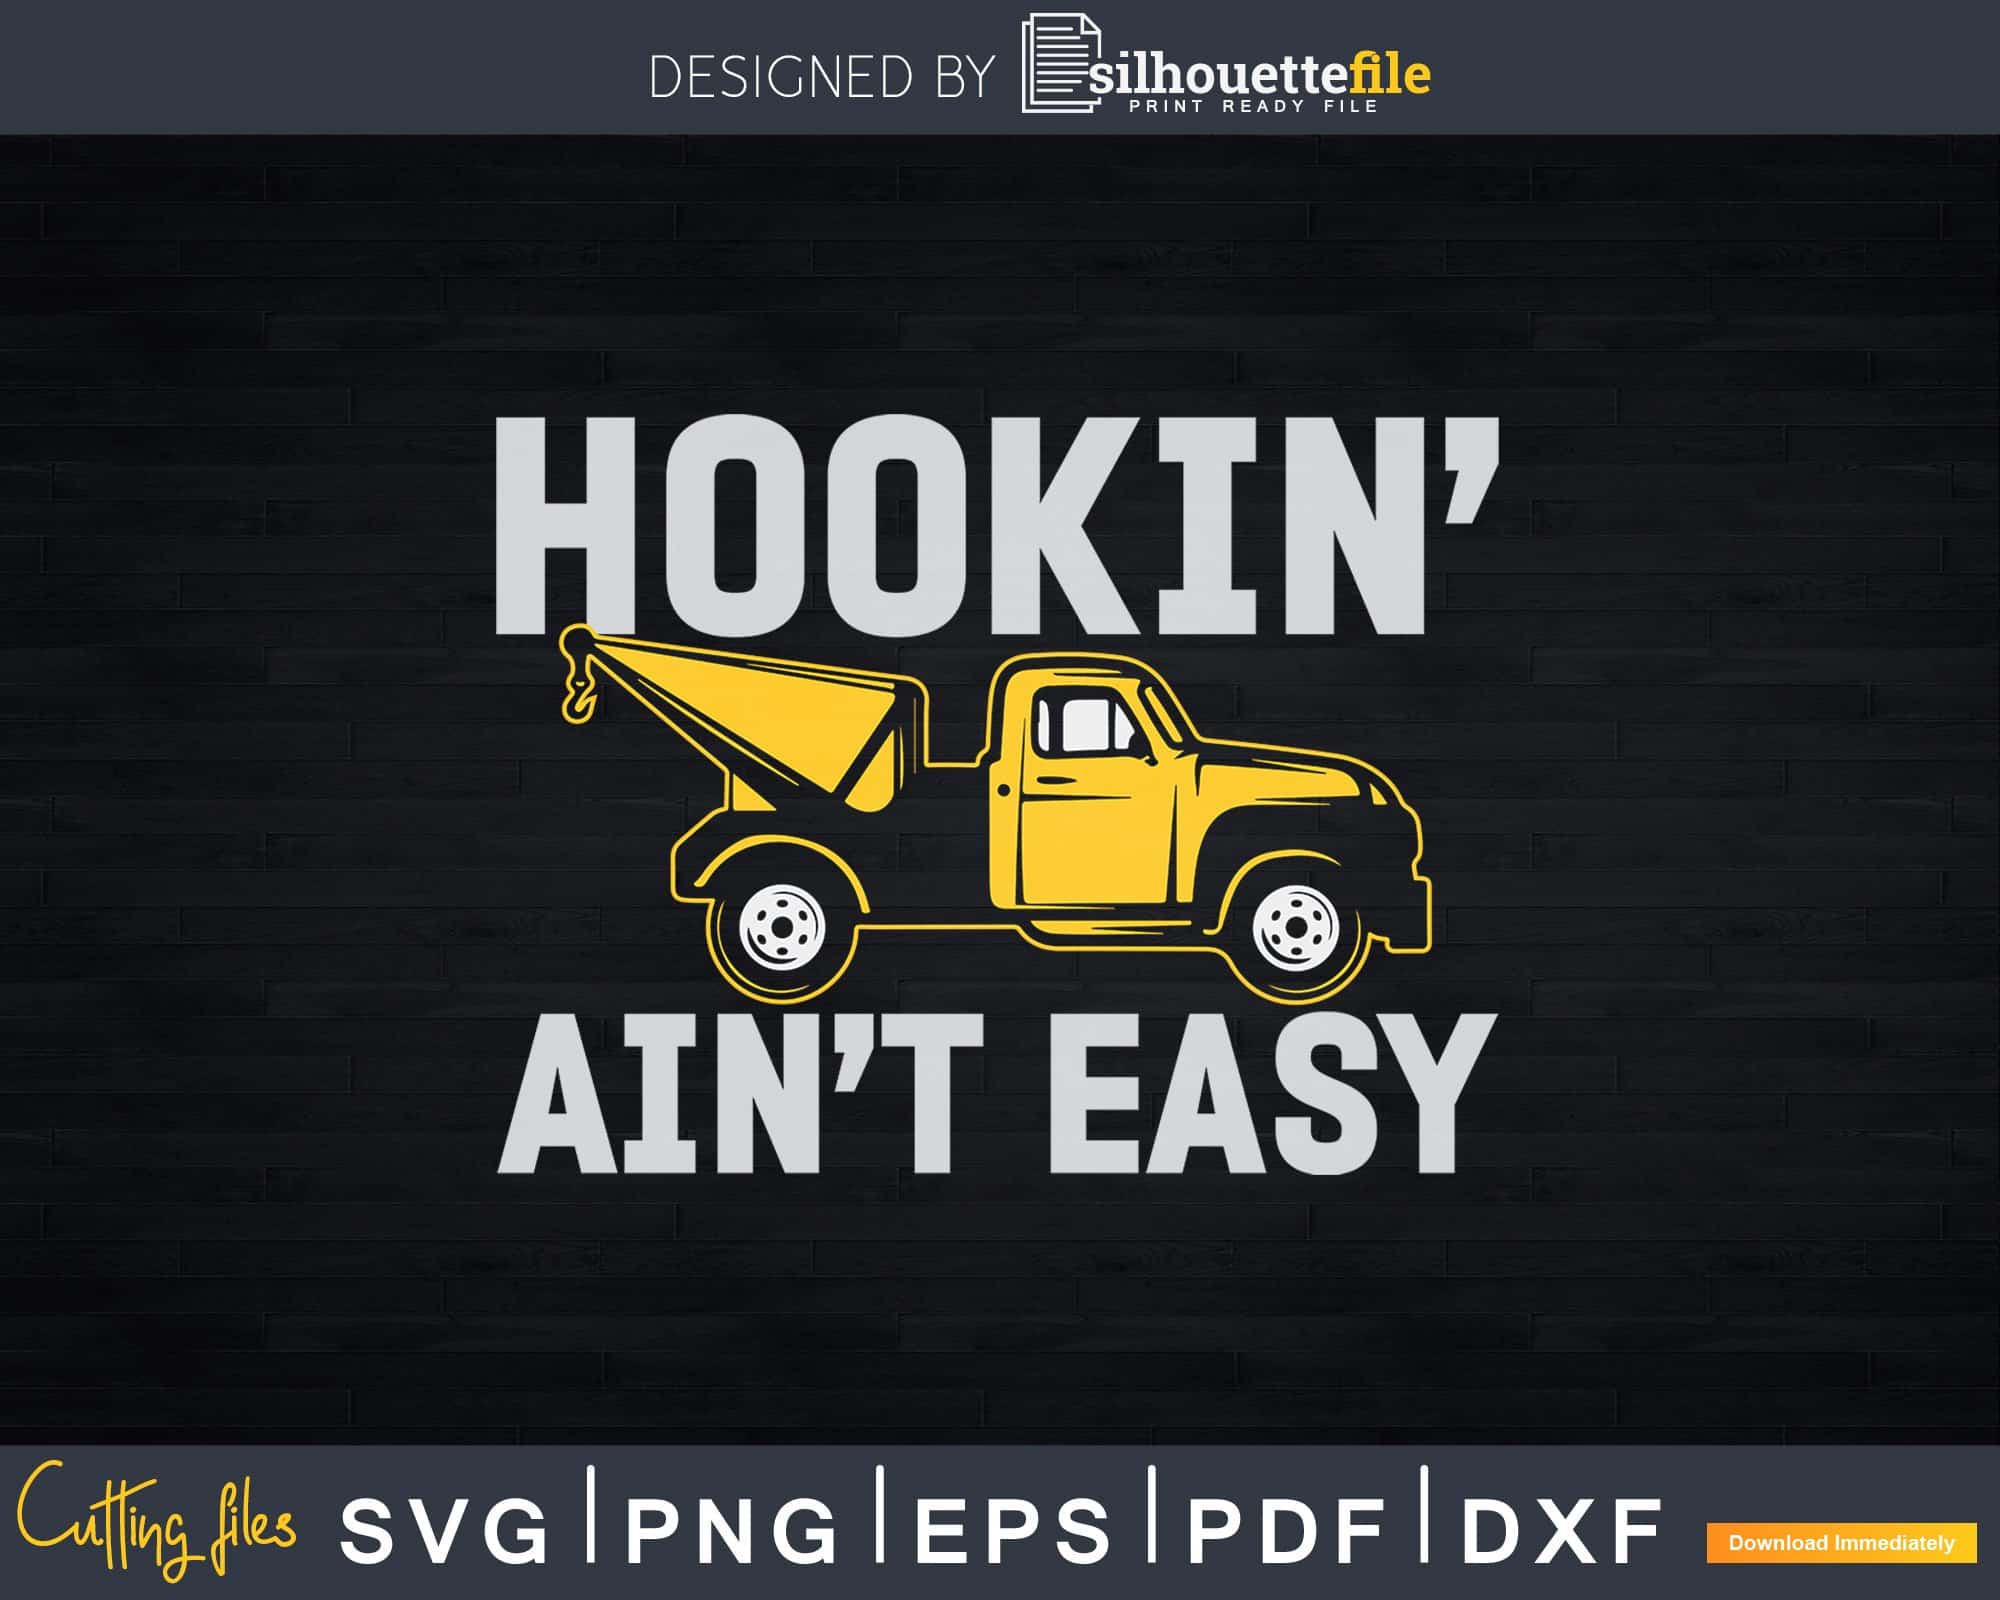 Hooks and Chains Excite Me Tow Truck Driver Svg Cricut Files